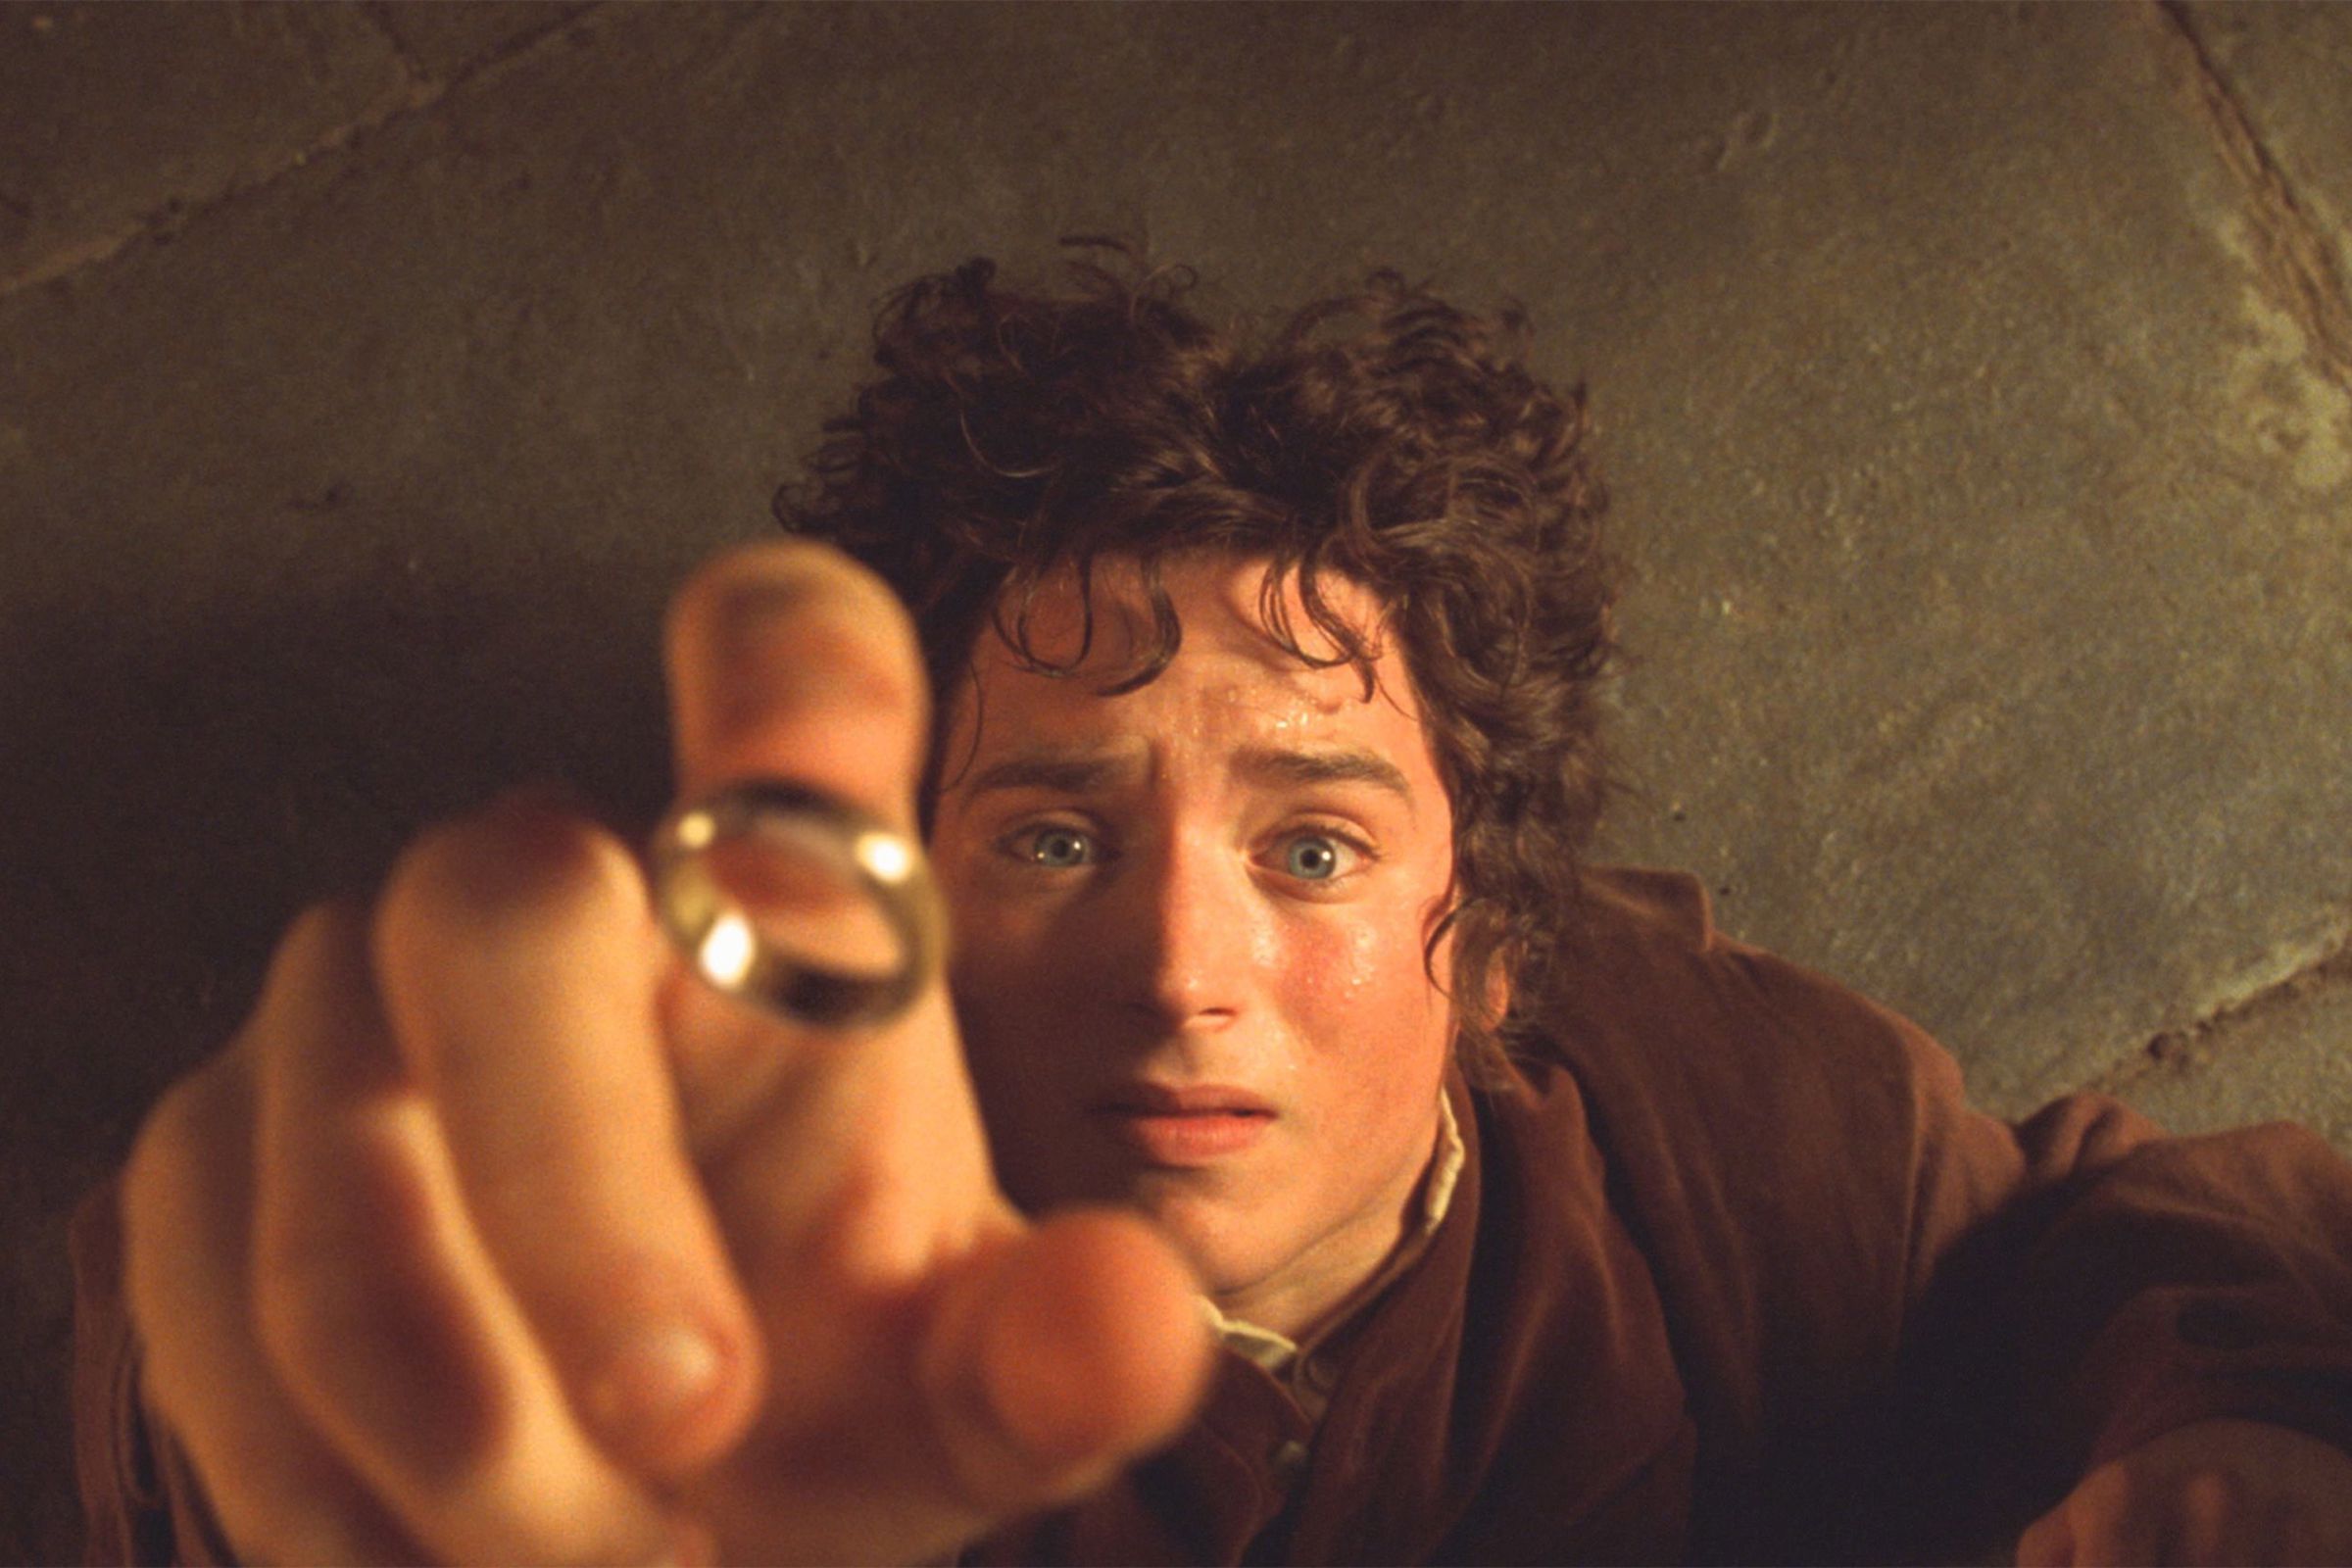 Frodo, played by Elijah Wood, reaches for the ring.